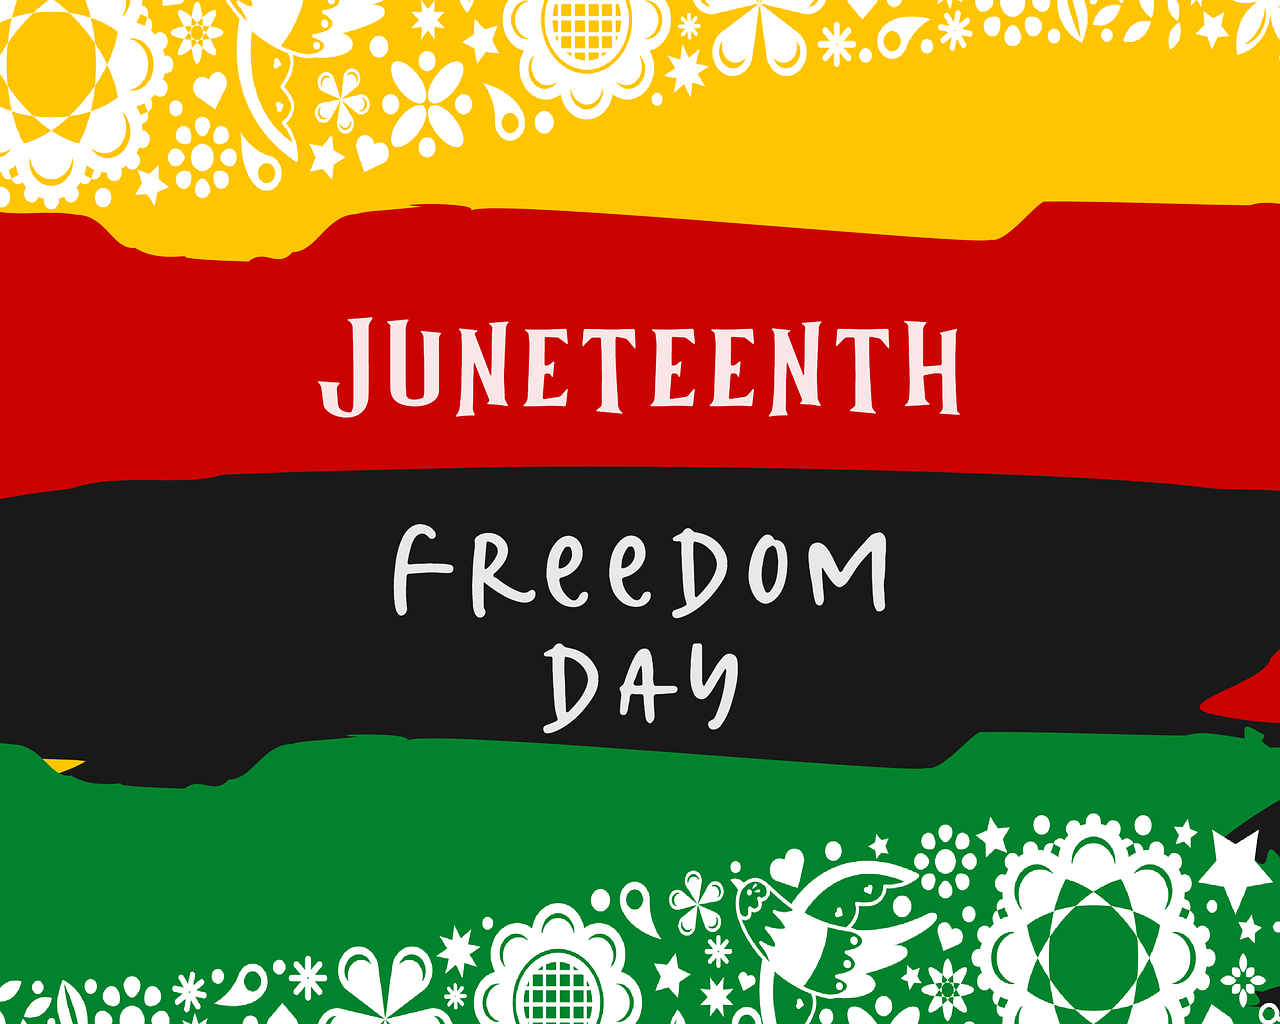 juneteenth-freedom-day